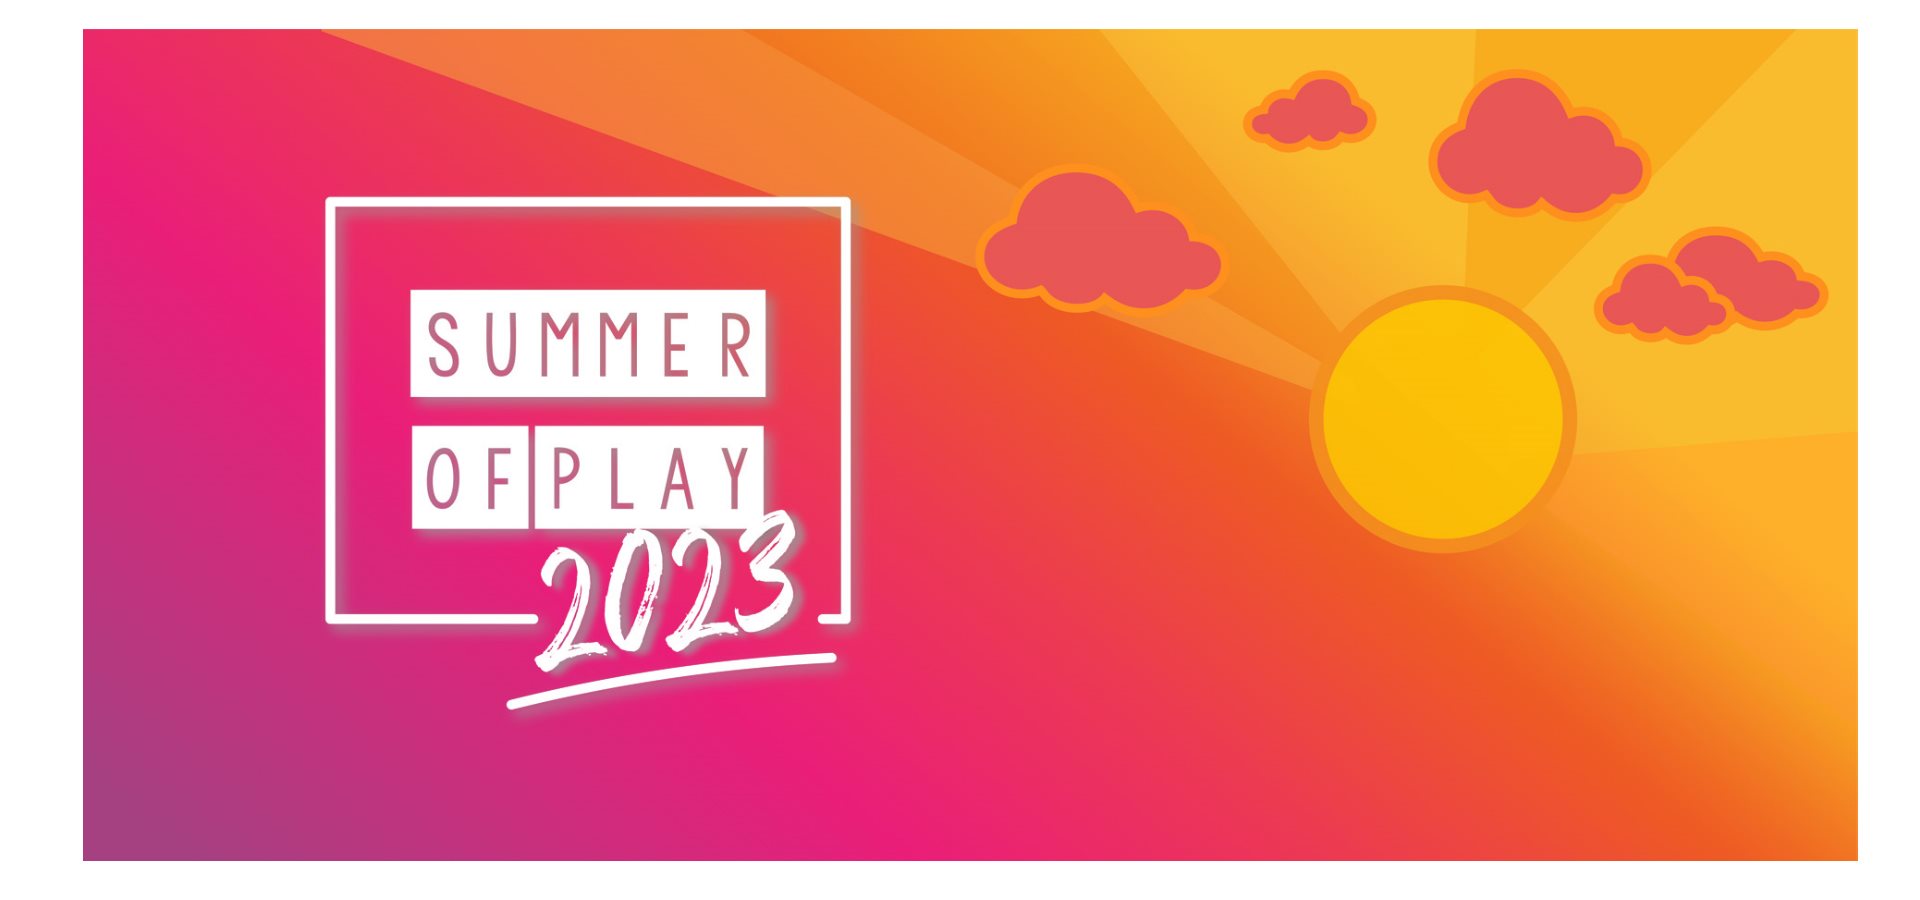 Summer of Play graphic